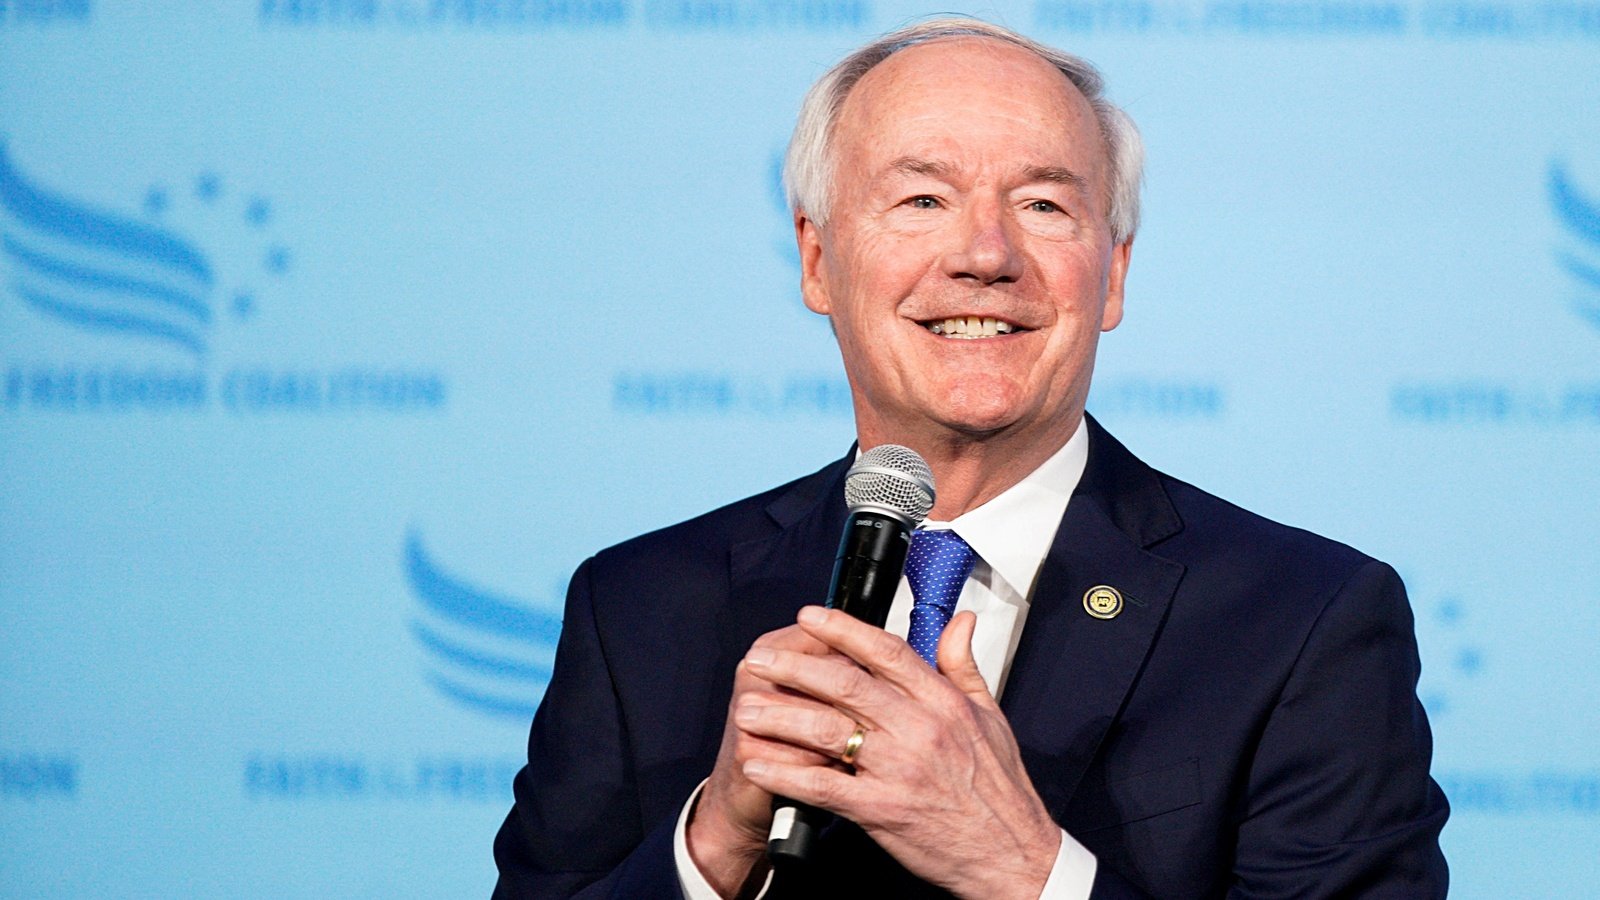 Rep Forced Porn Video Long Hd - Meet Asa Hutchinson, Republican Presidential Candidate | Council on Foreign  Relations